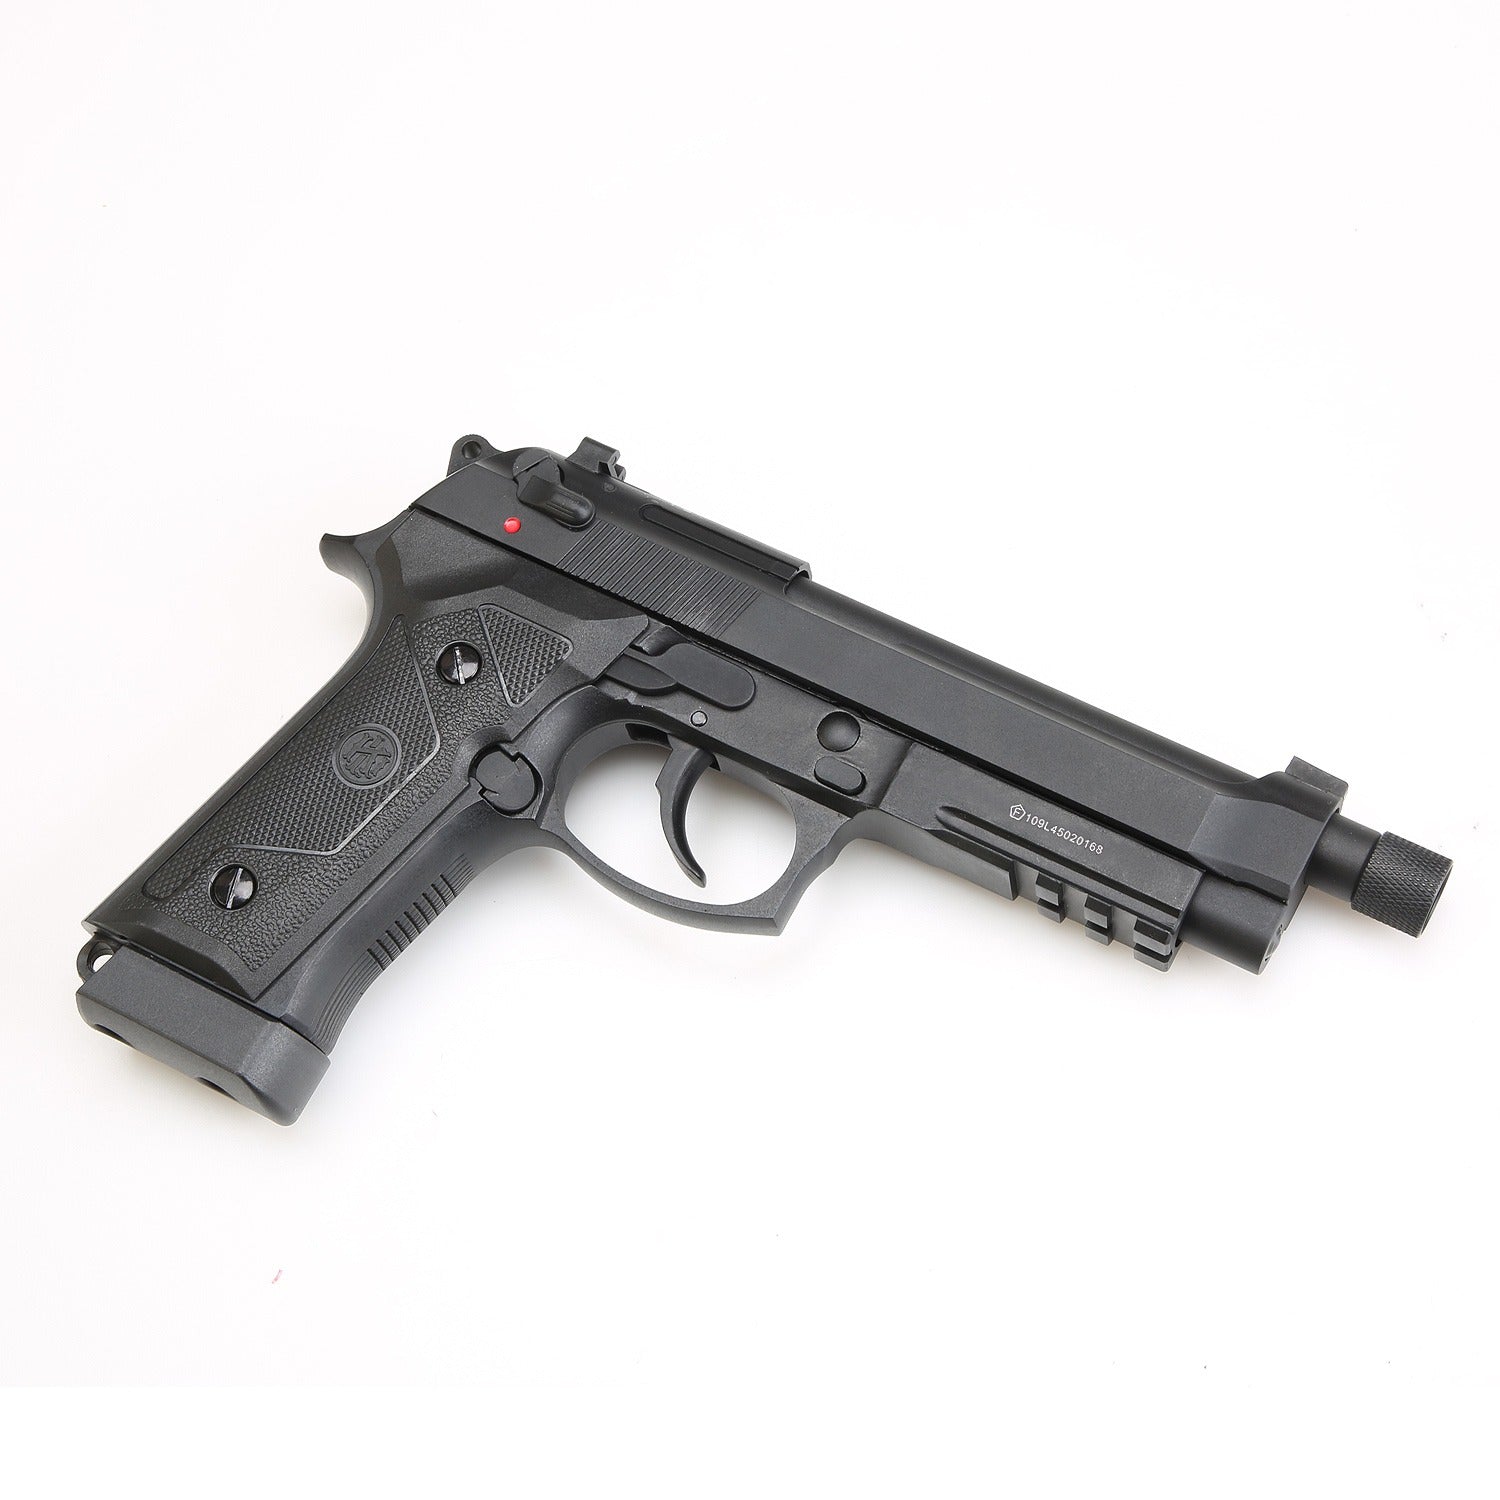 KROWN LAND KL M92 CO2 BLOWBACK AIR PISTOL WITH THREADED BARREL BOXED